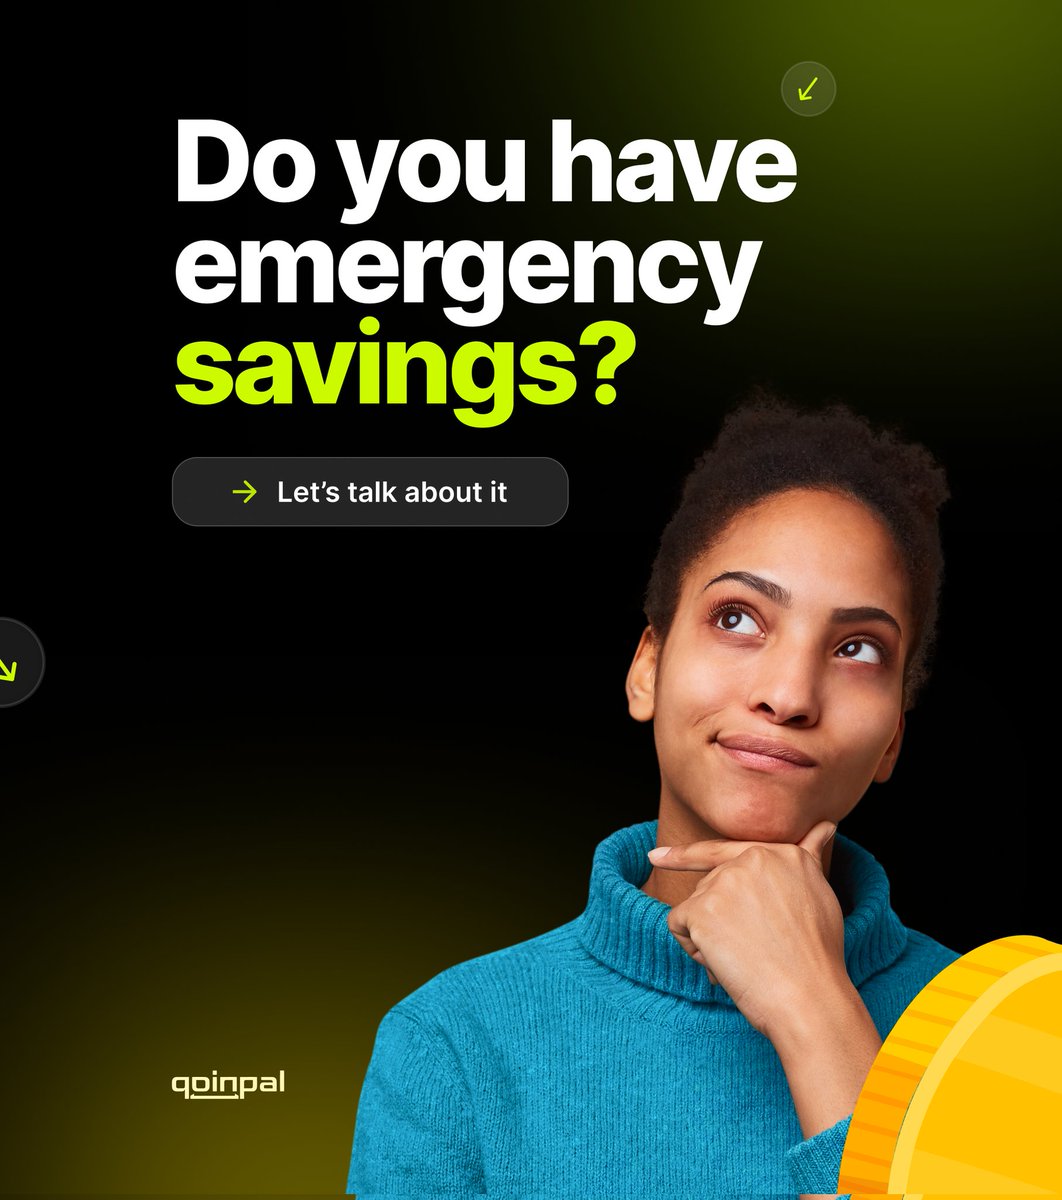 Let's talk about emergency savings. 💬 

Have you established a financial safety blanket? Are your savings the same as your emergency savings or they're separate?

Share your experiences, tips, and questions with us in the comments!💸

#qoinpal #moneytalks #financefriday #fintech